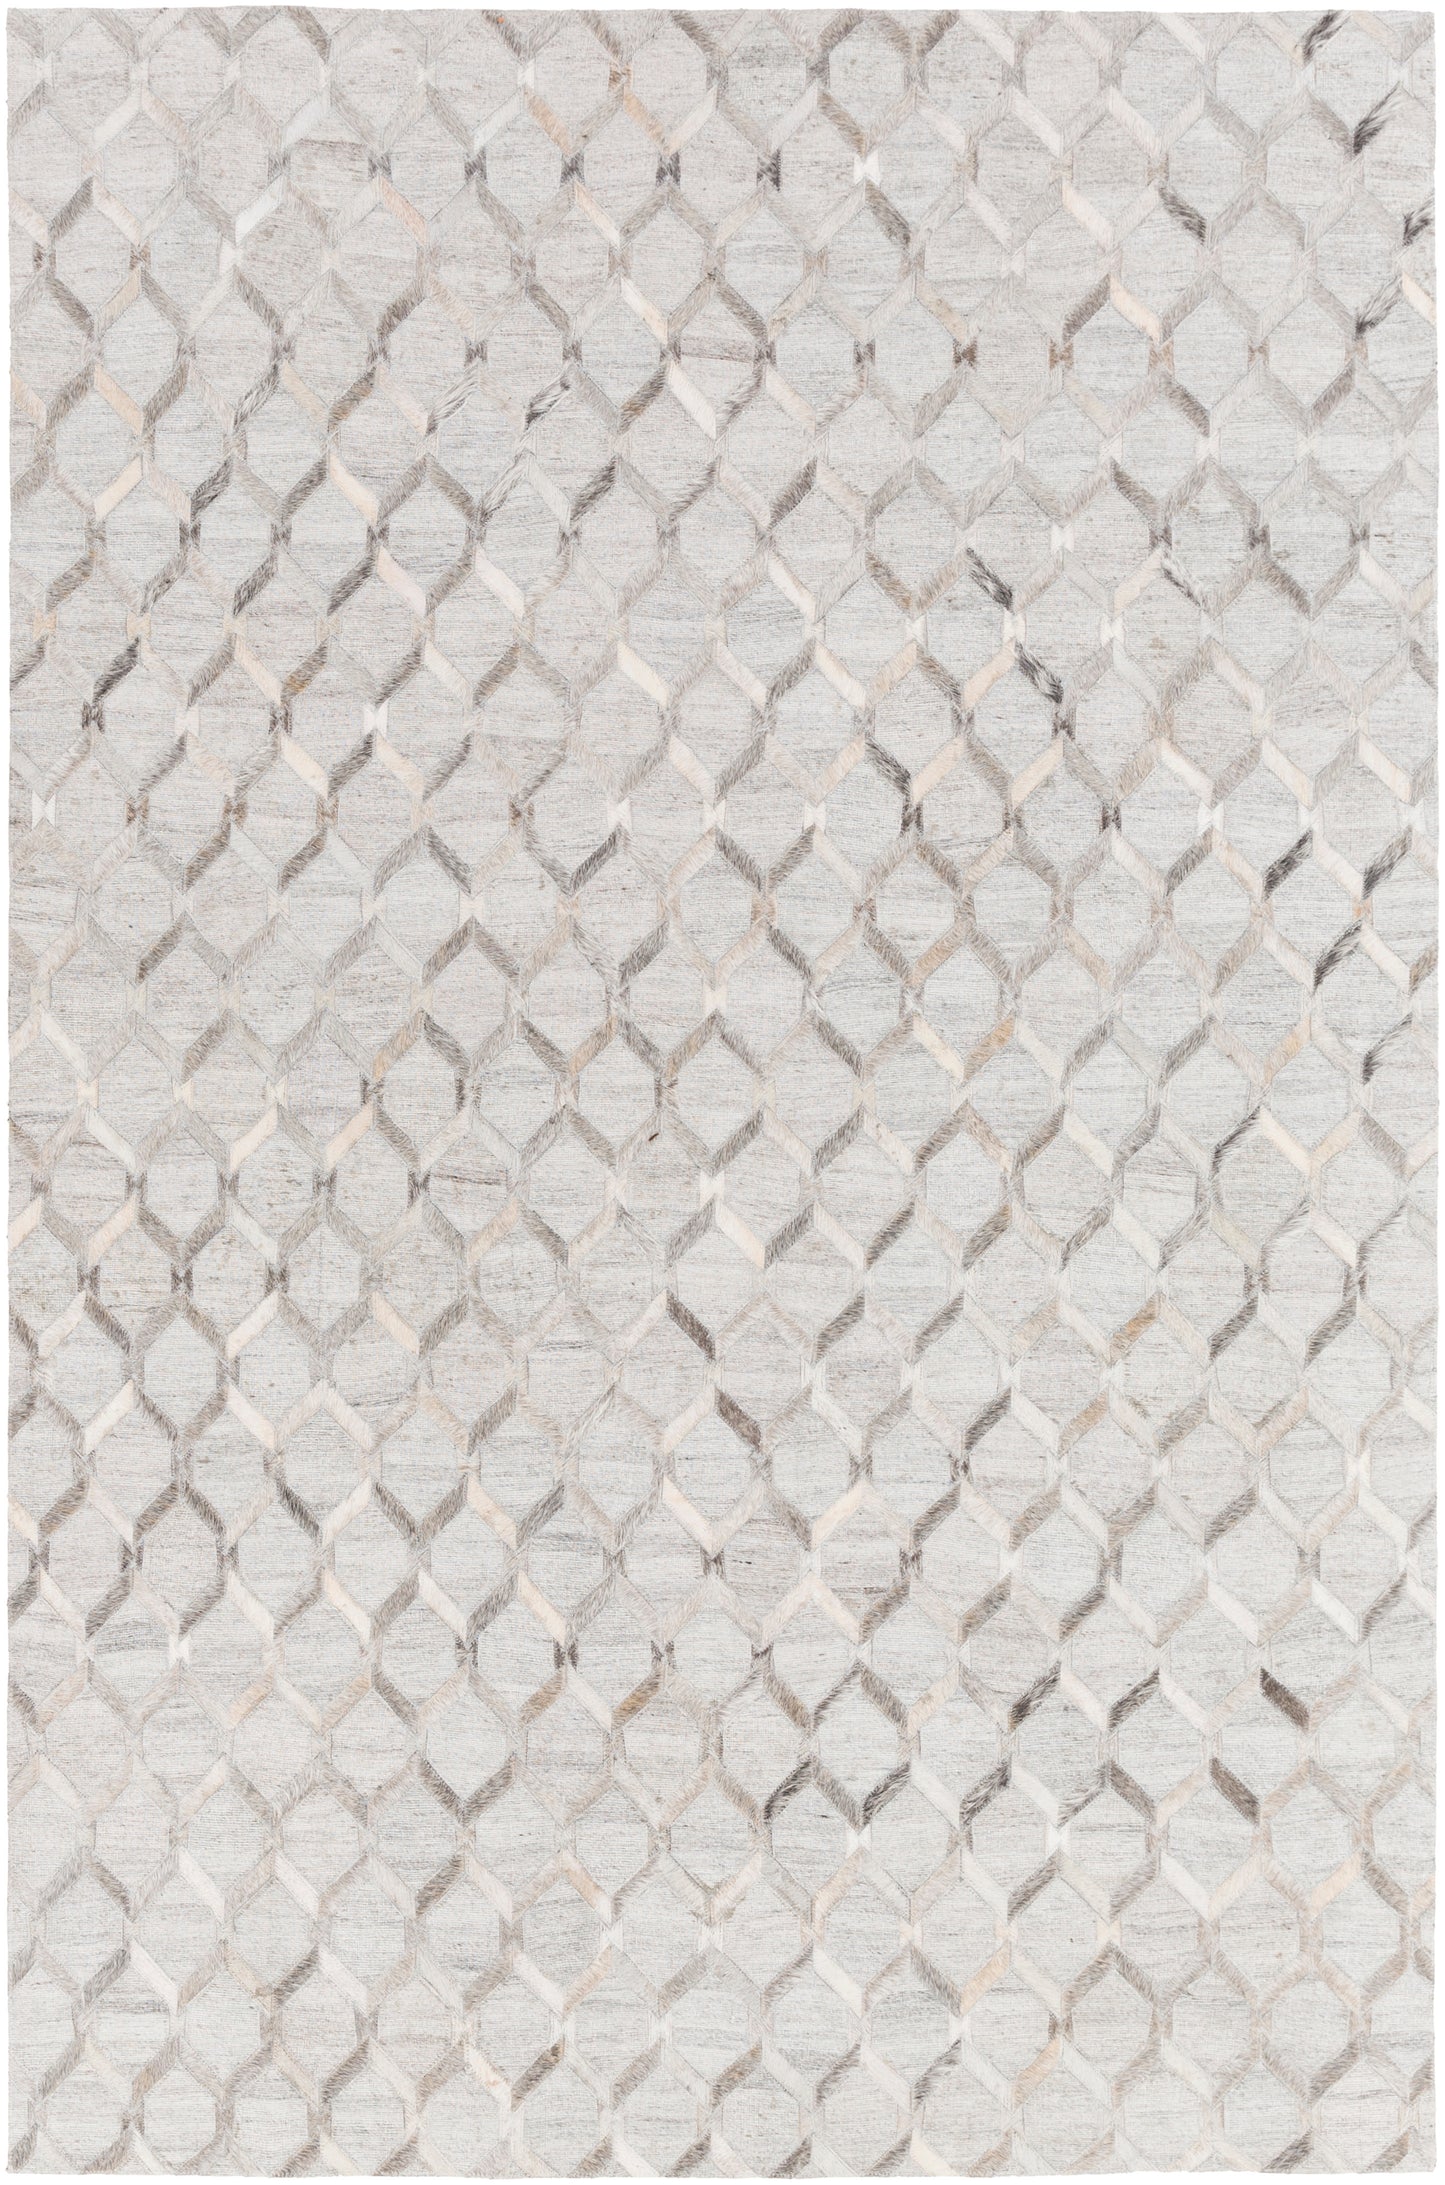 Medora 15814 Hand Crafted Leather Indoor Area Rug by Surya Rugs